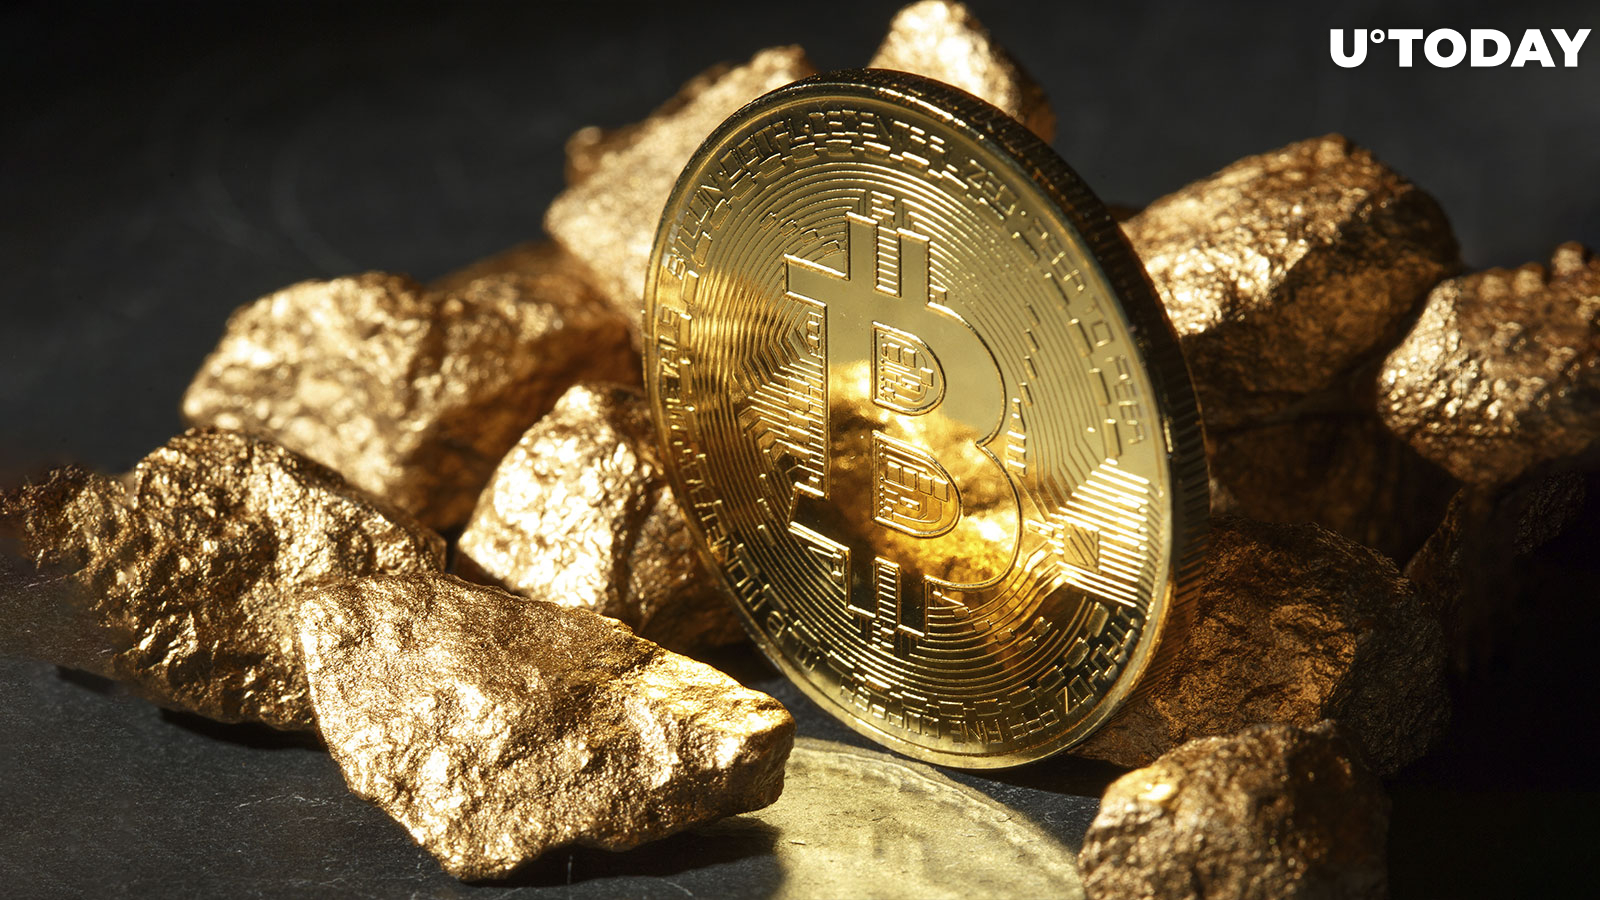 Bernstein Calls Bitcoin (BTC) “Faster Horse” Compared to Gold 